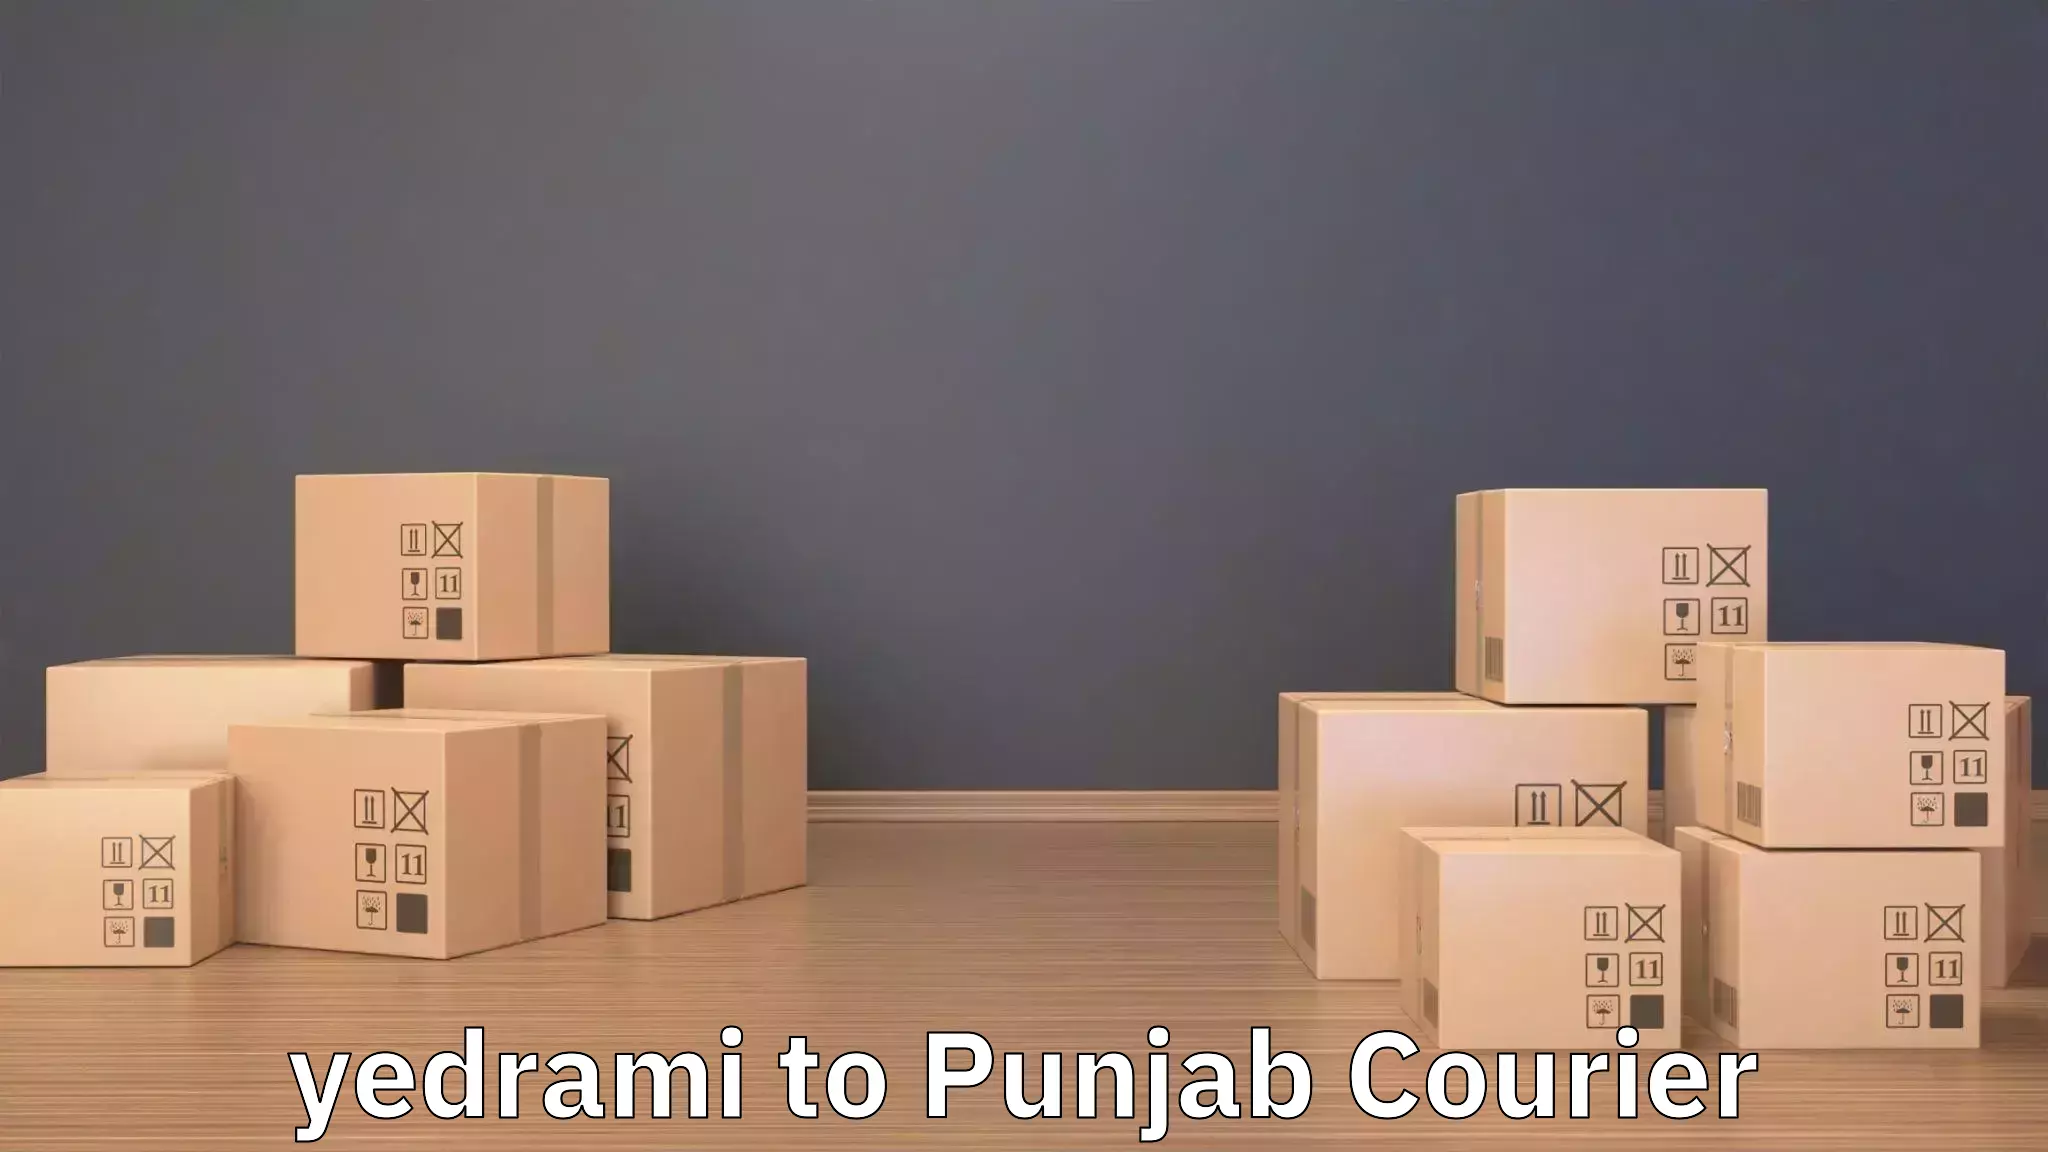 Moving and handling services yedrami to Mohali